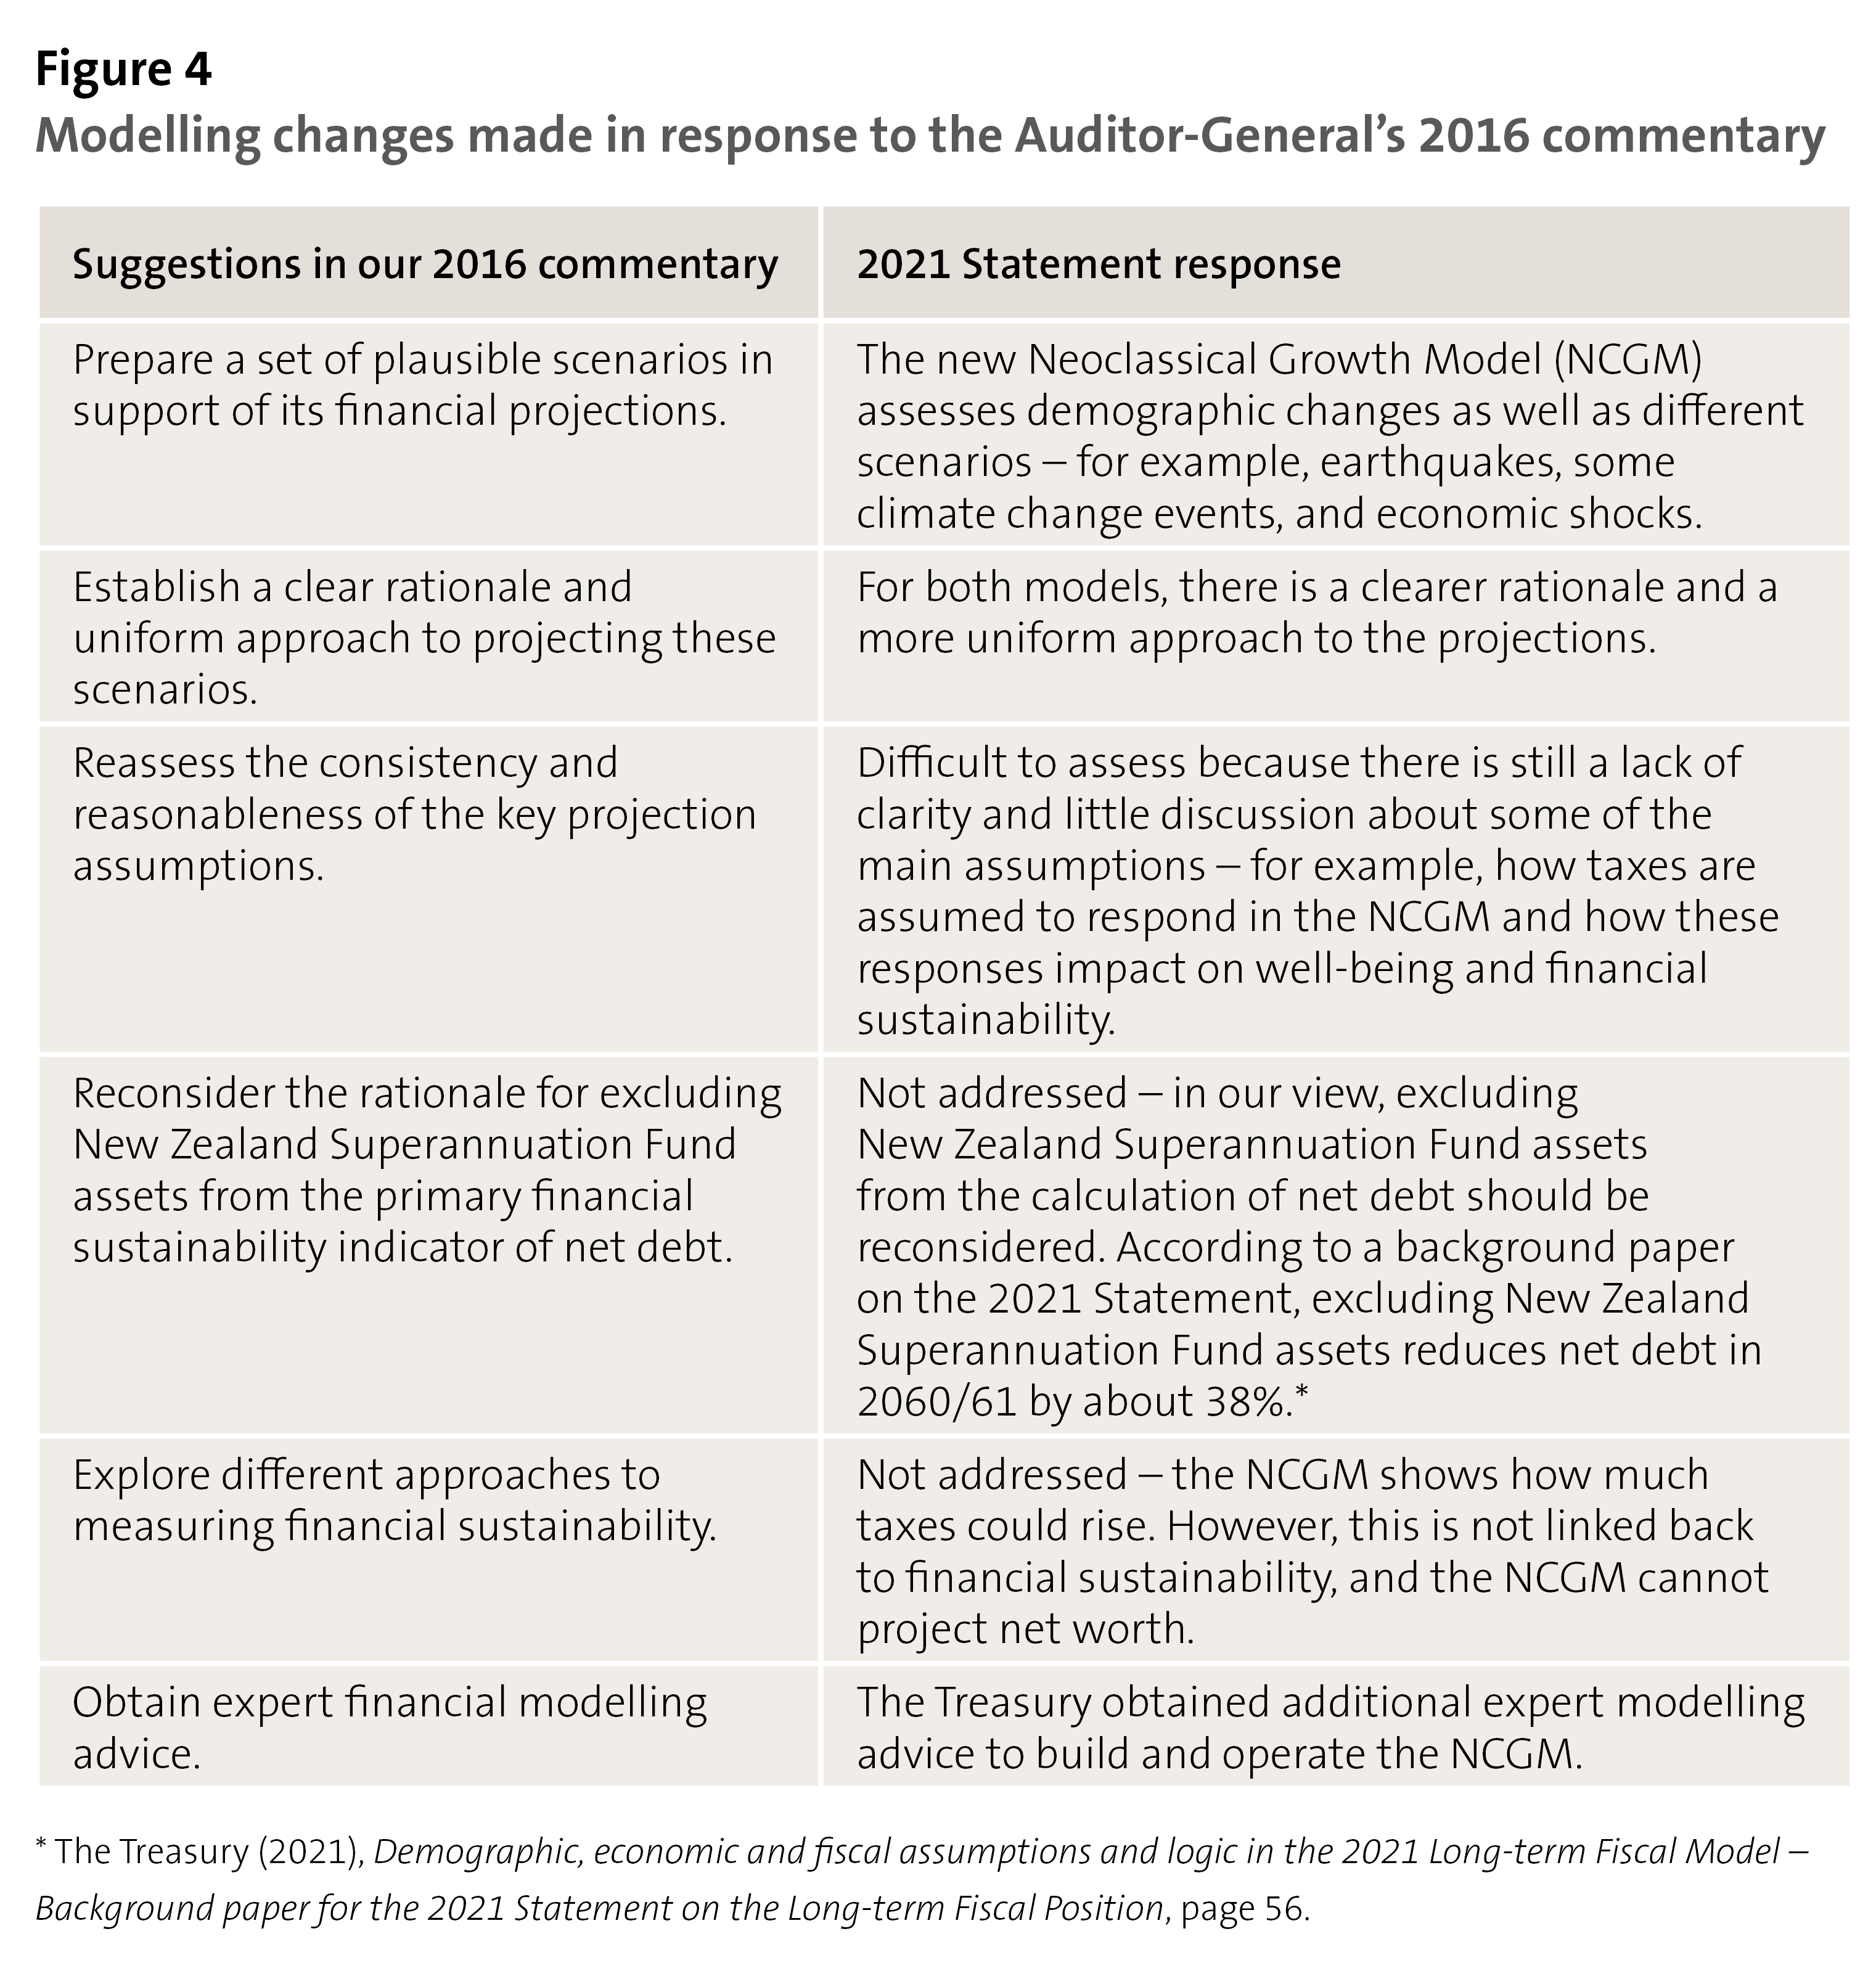 Figure 4: Modelling changes made in response to the Auditor-General’s 2016 commentary